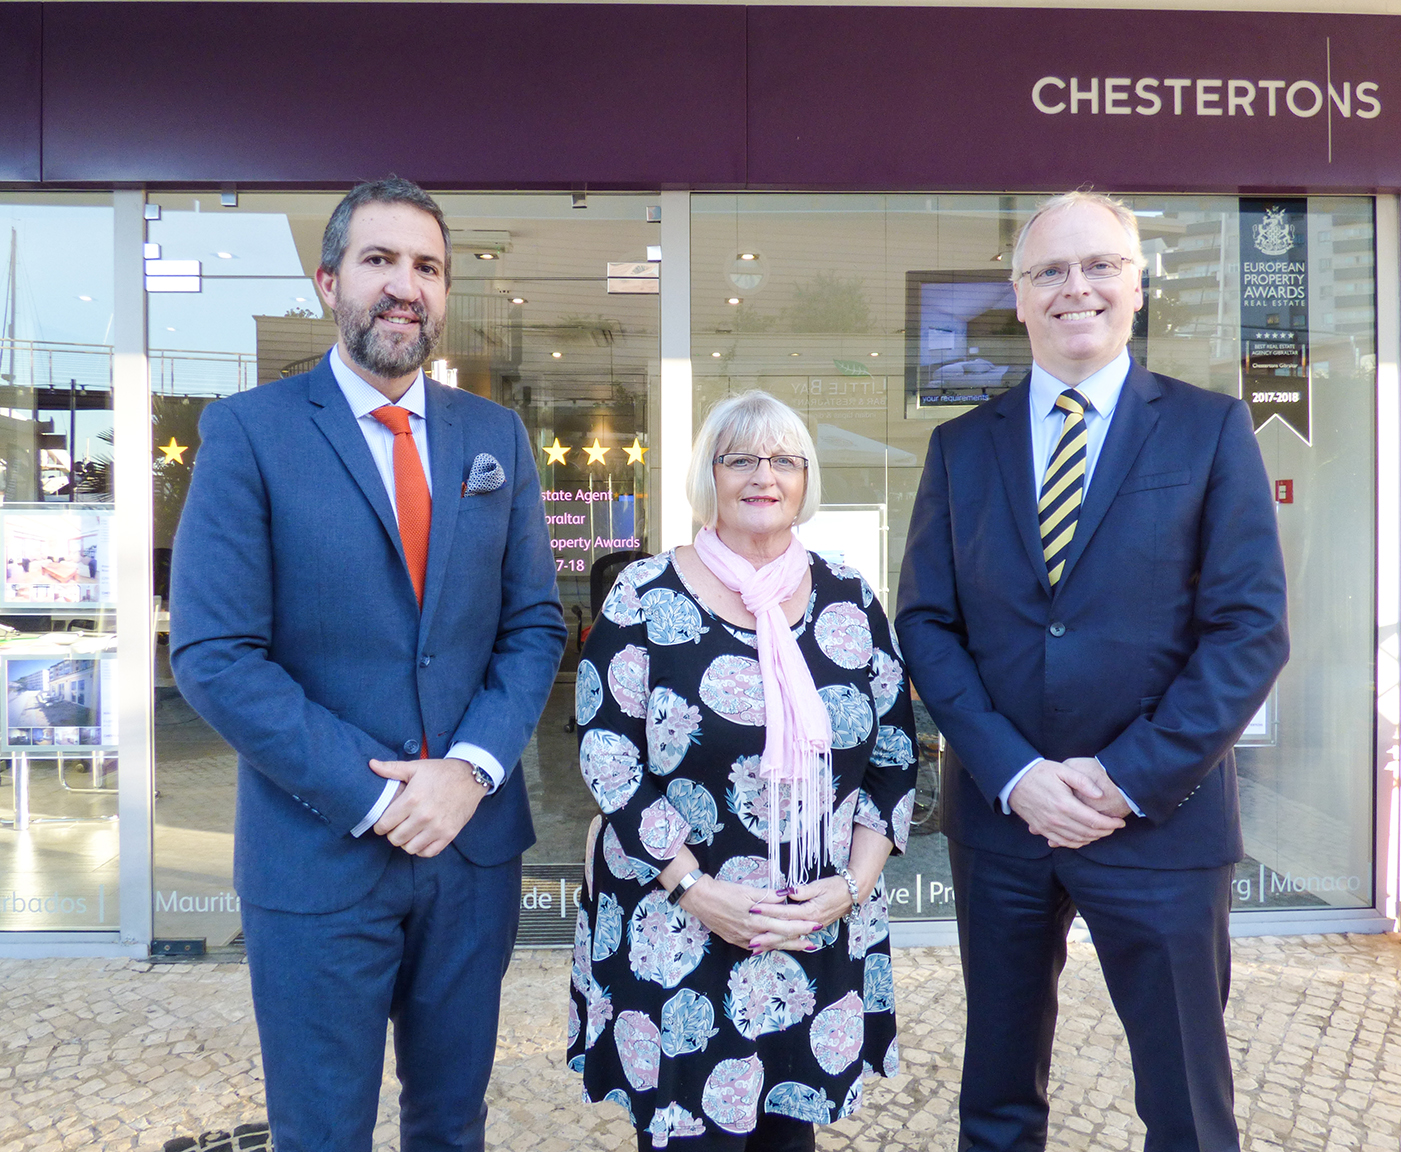 Chestertons Gibraltar has become the first Bronze sponsor of the Gibraltar 2019 NatWest International Island Games Image